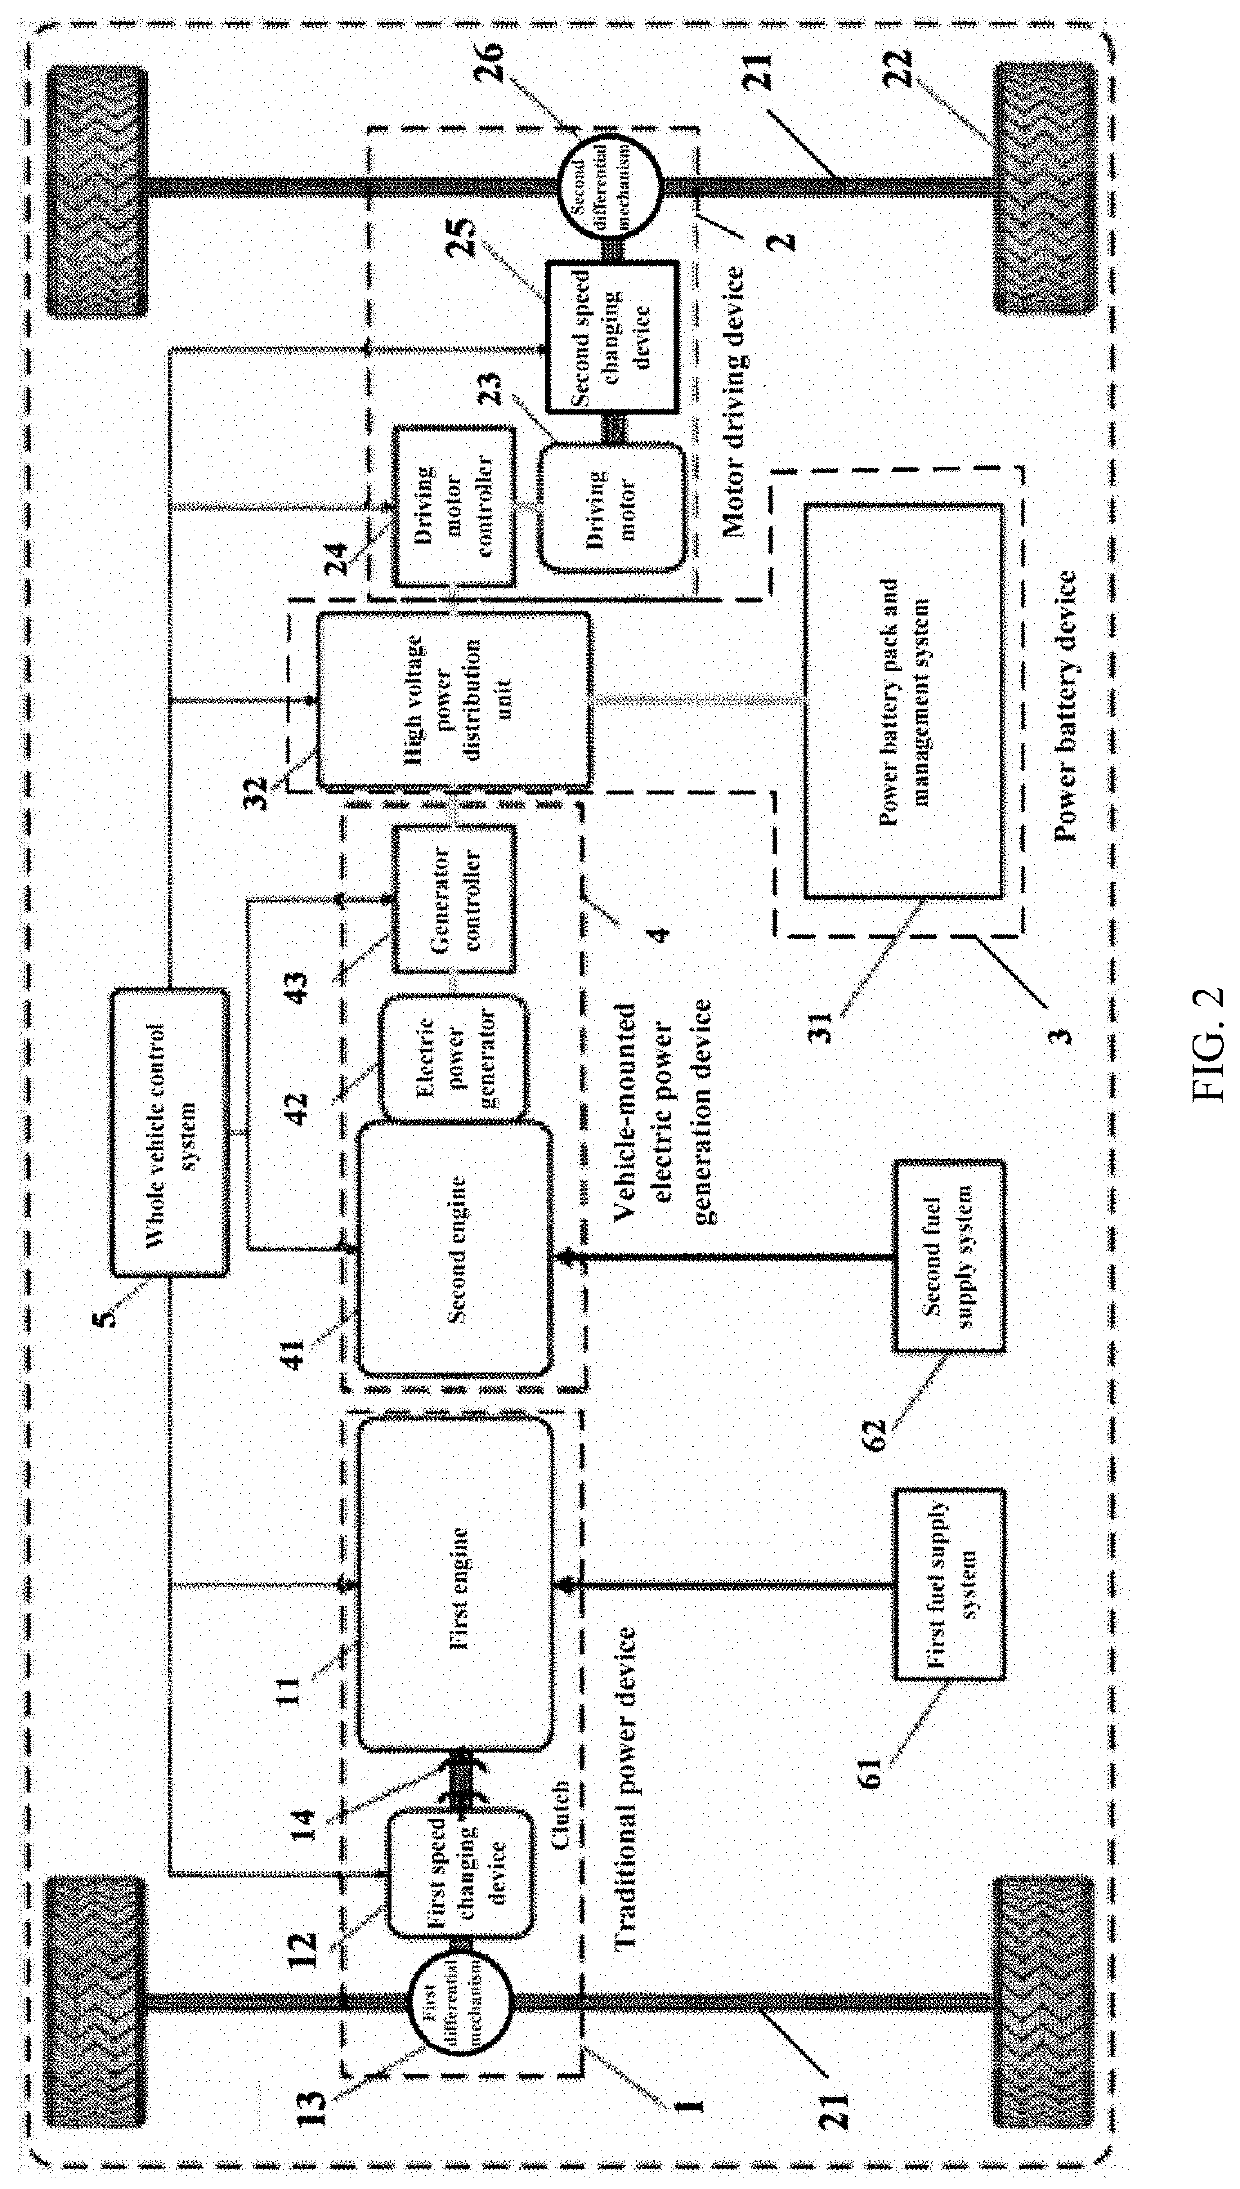 Series-parallel hybrid power system and vehicle working mode decision-making method